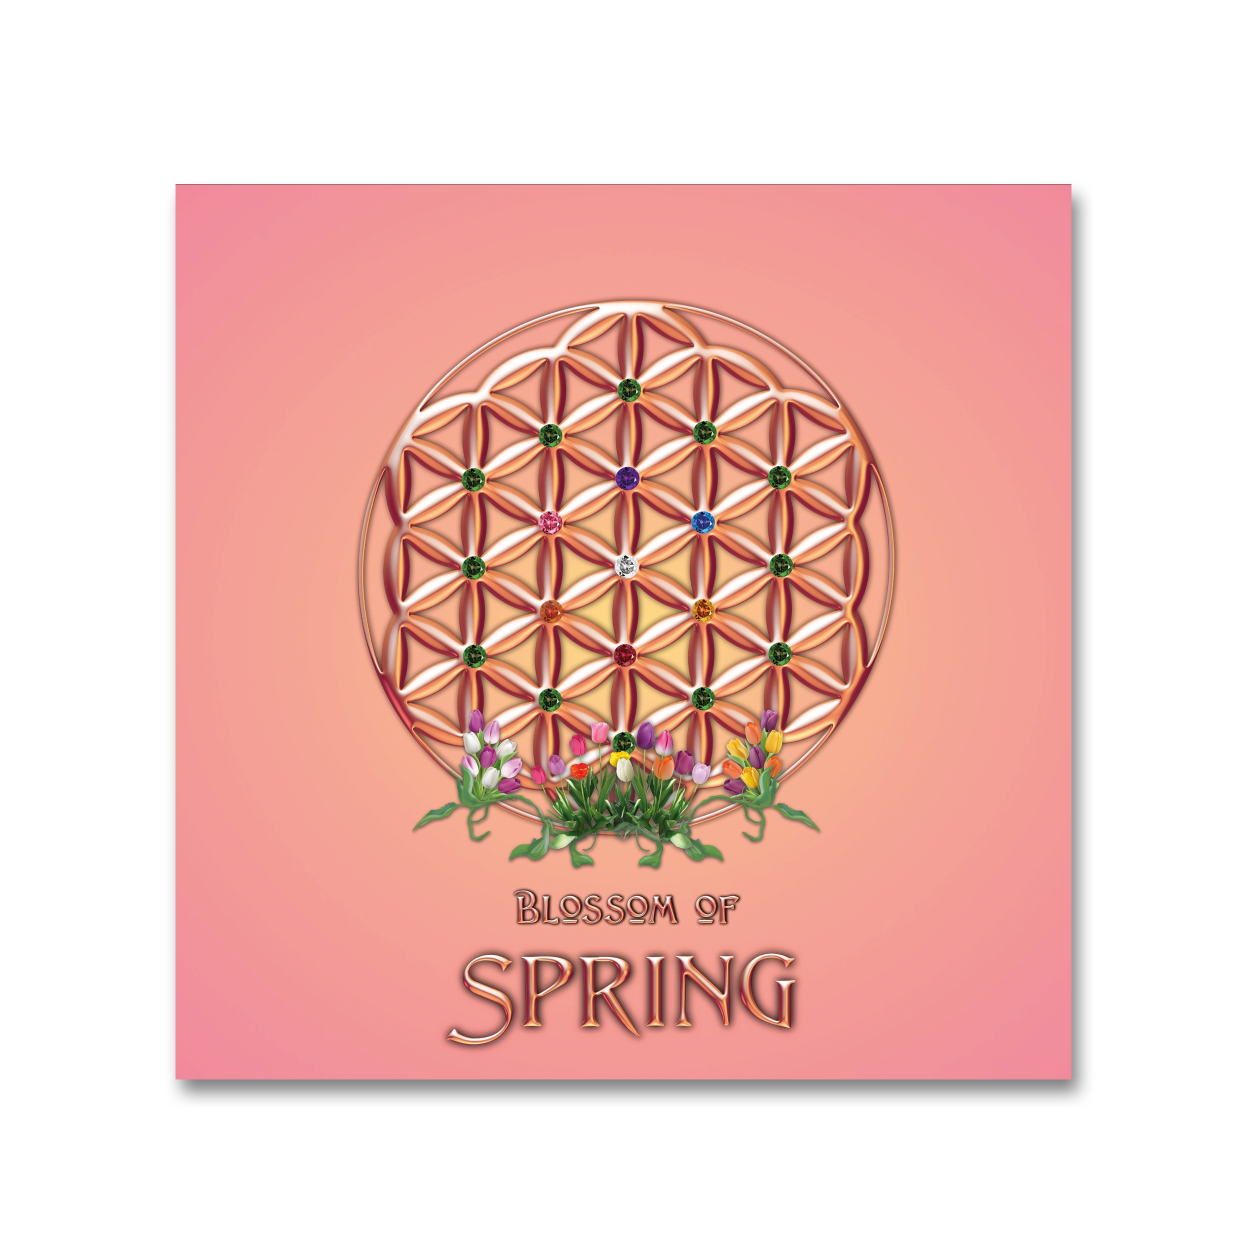 Blossom of Spring MP3 Download